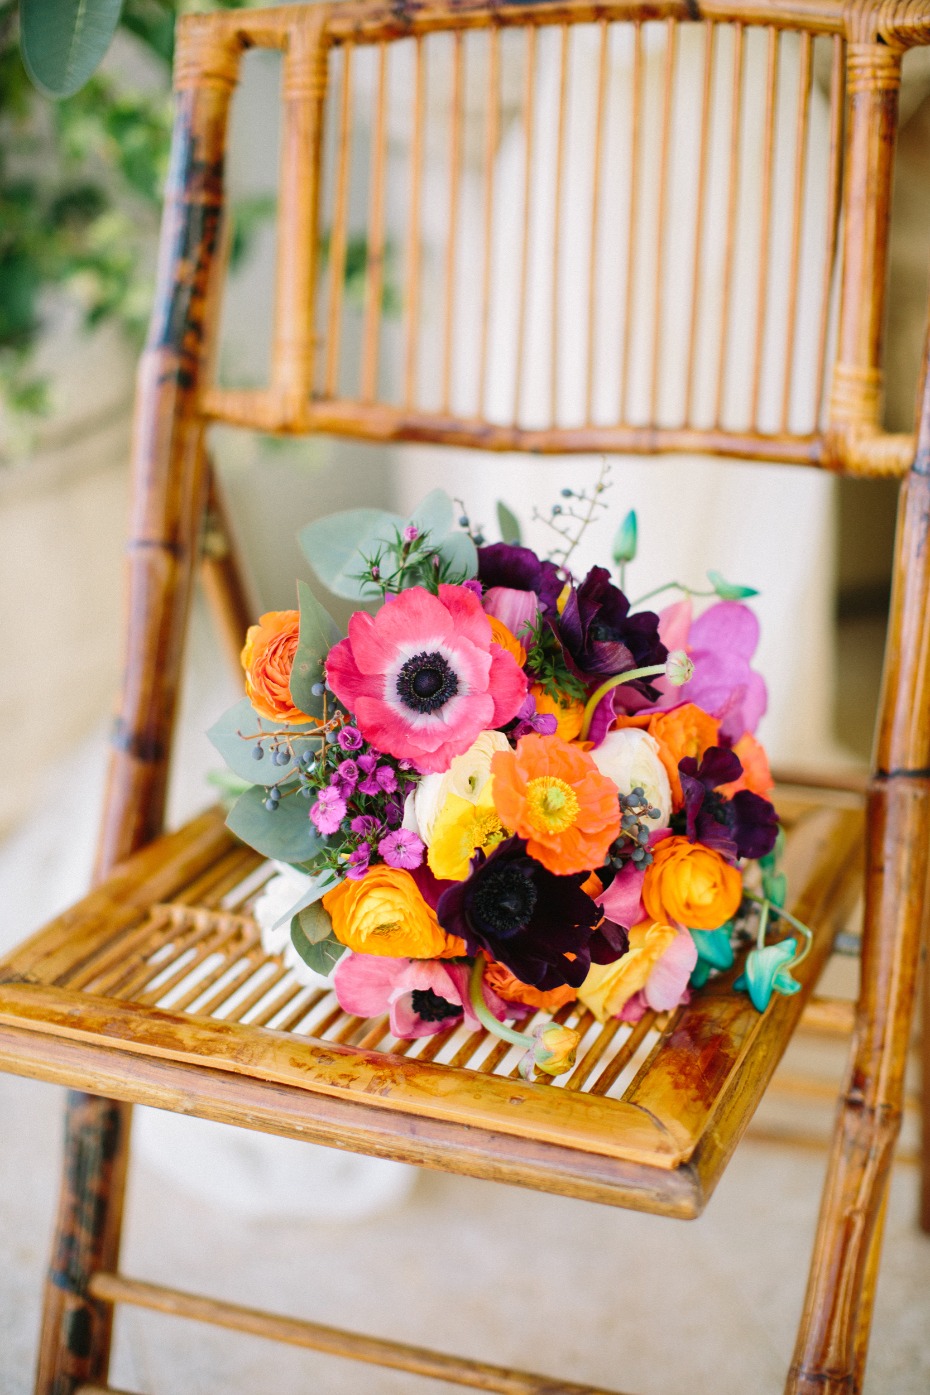 Small and colorful wedding bouquet